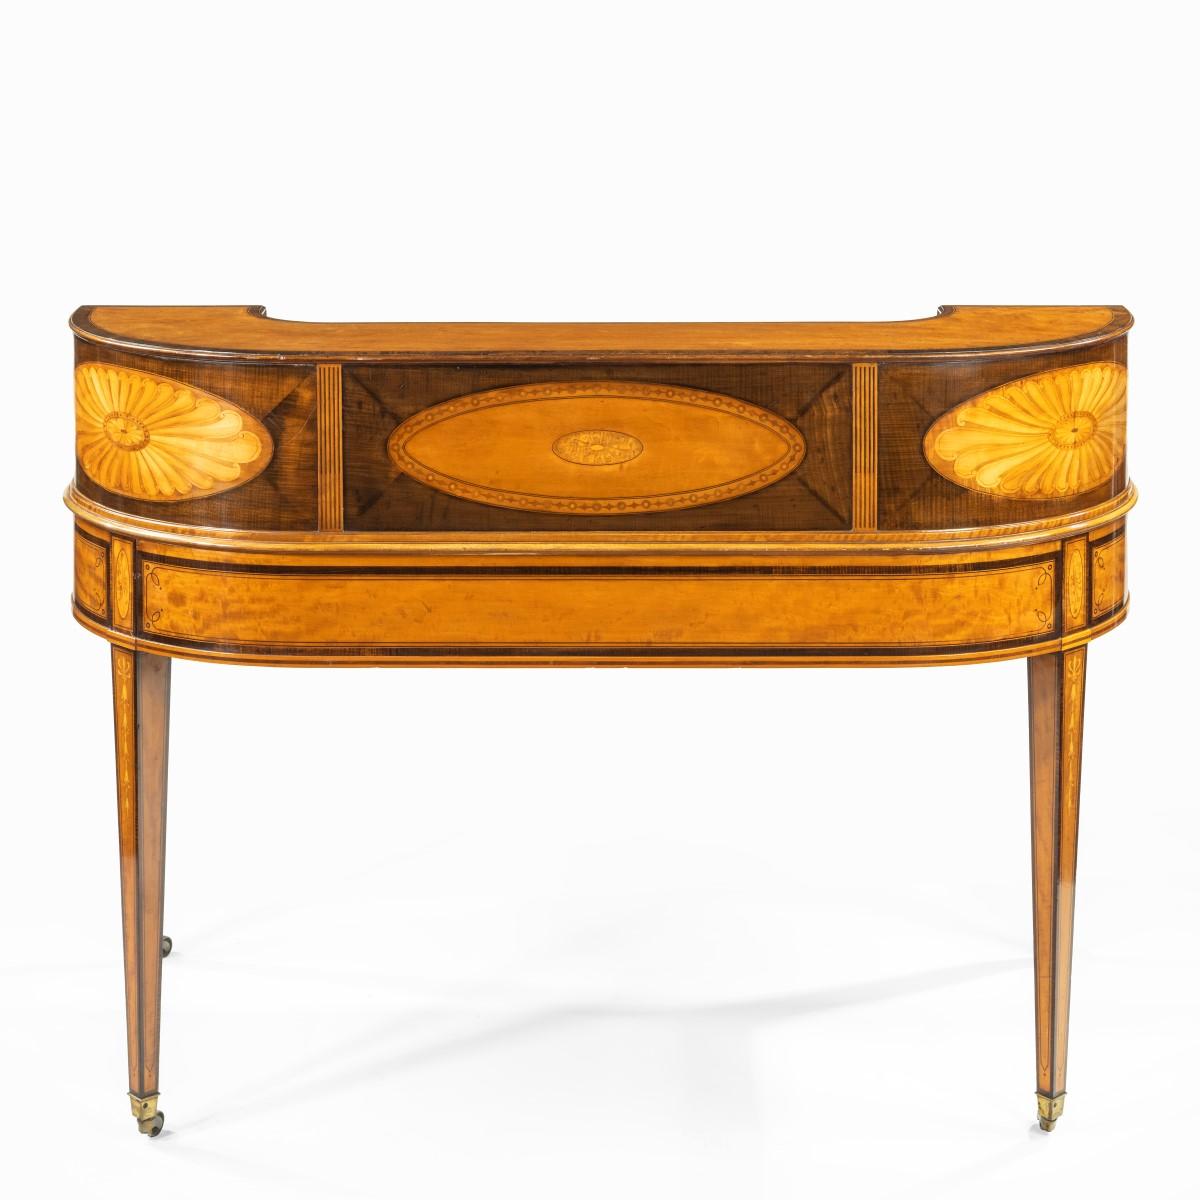 A late Victorian freestanding satinwood Carlton House desk, the curved rectangular top with the typical arrangement of six small drawers and a central cupboard around three sides, enclosing a leathered writing surface, sloping downwards to the